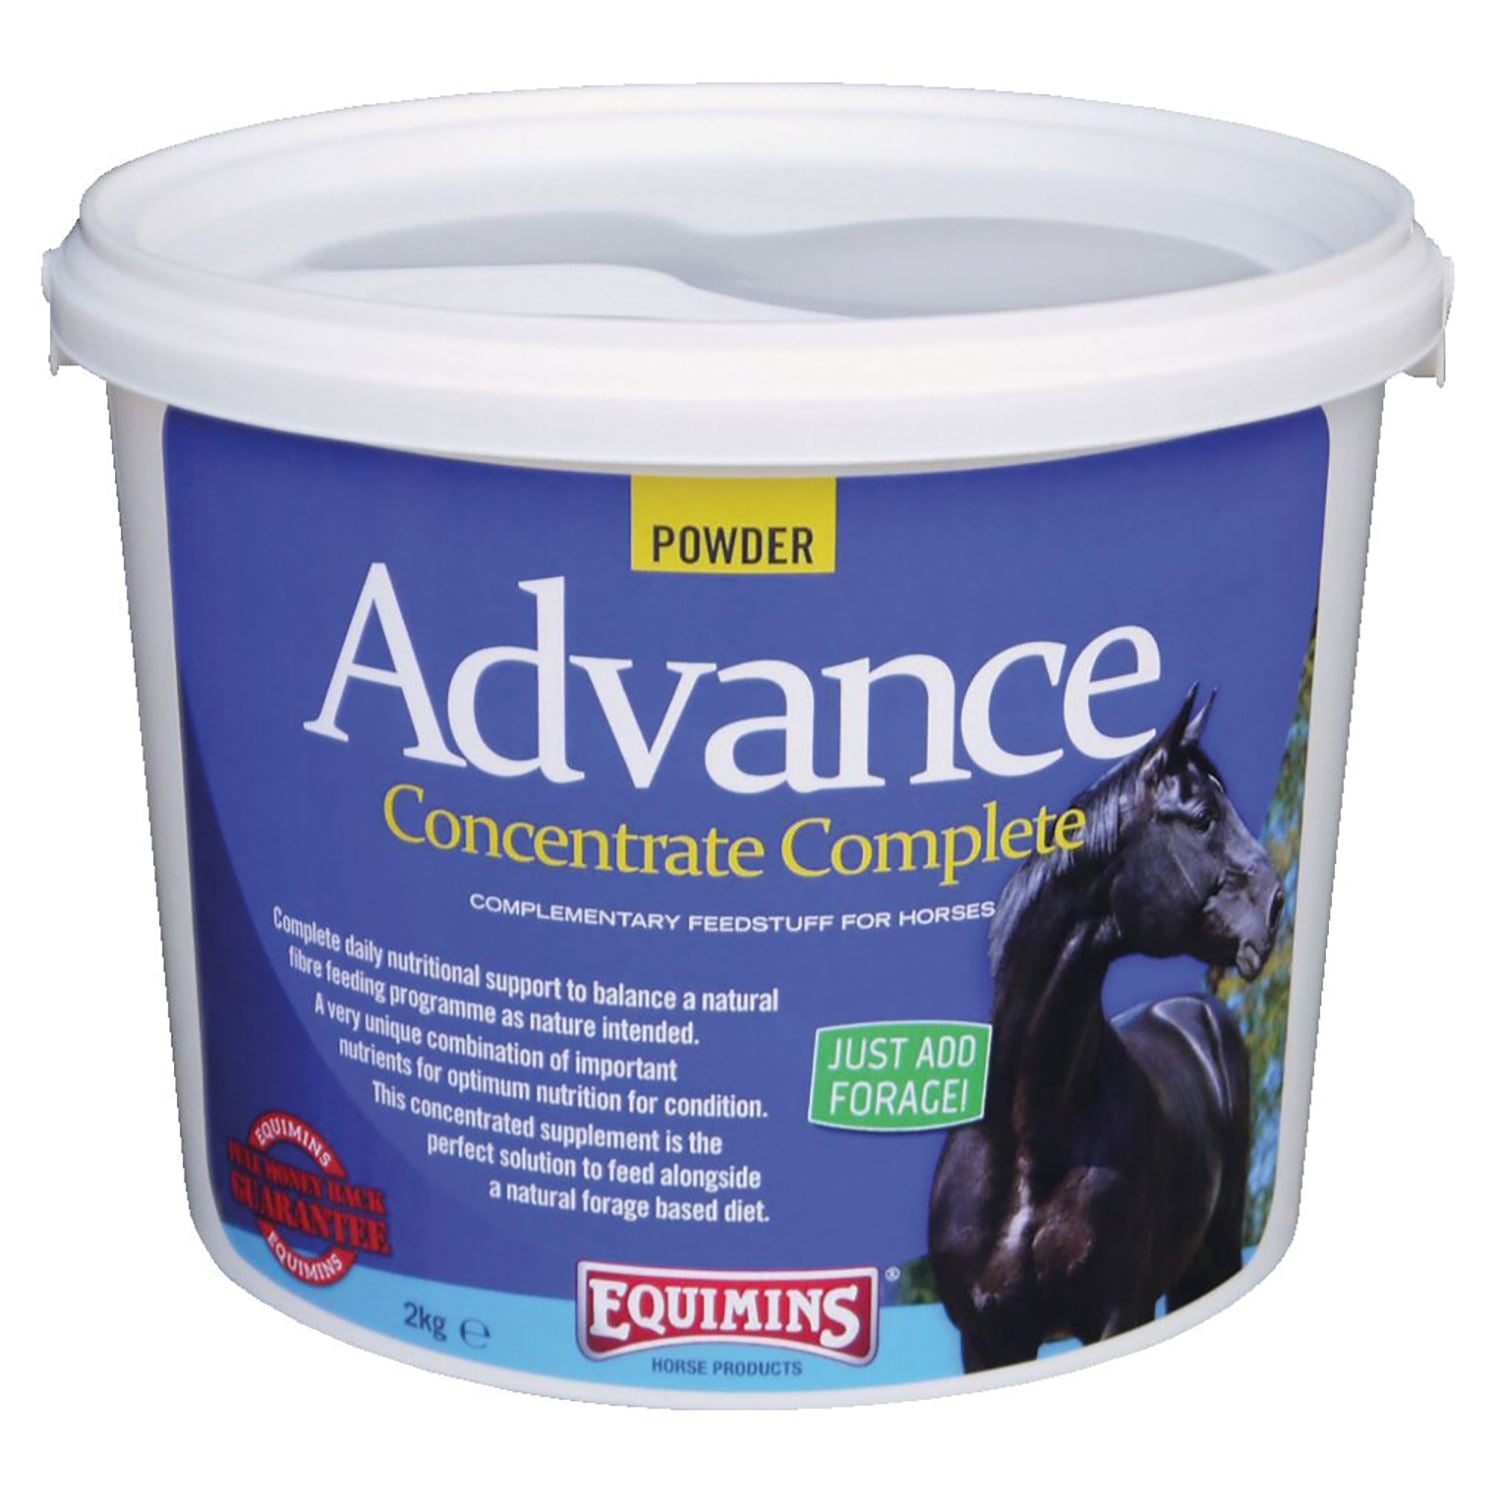 Equimins Advance Concentrate Complete Powder: Revolutionary Equine Diet Supplement